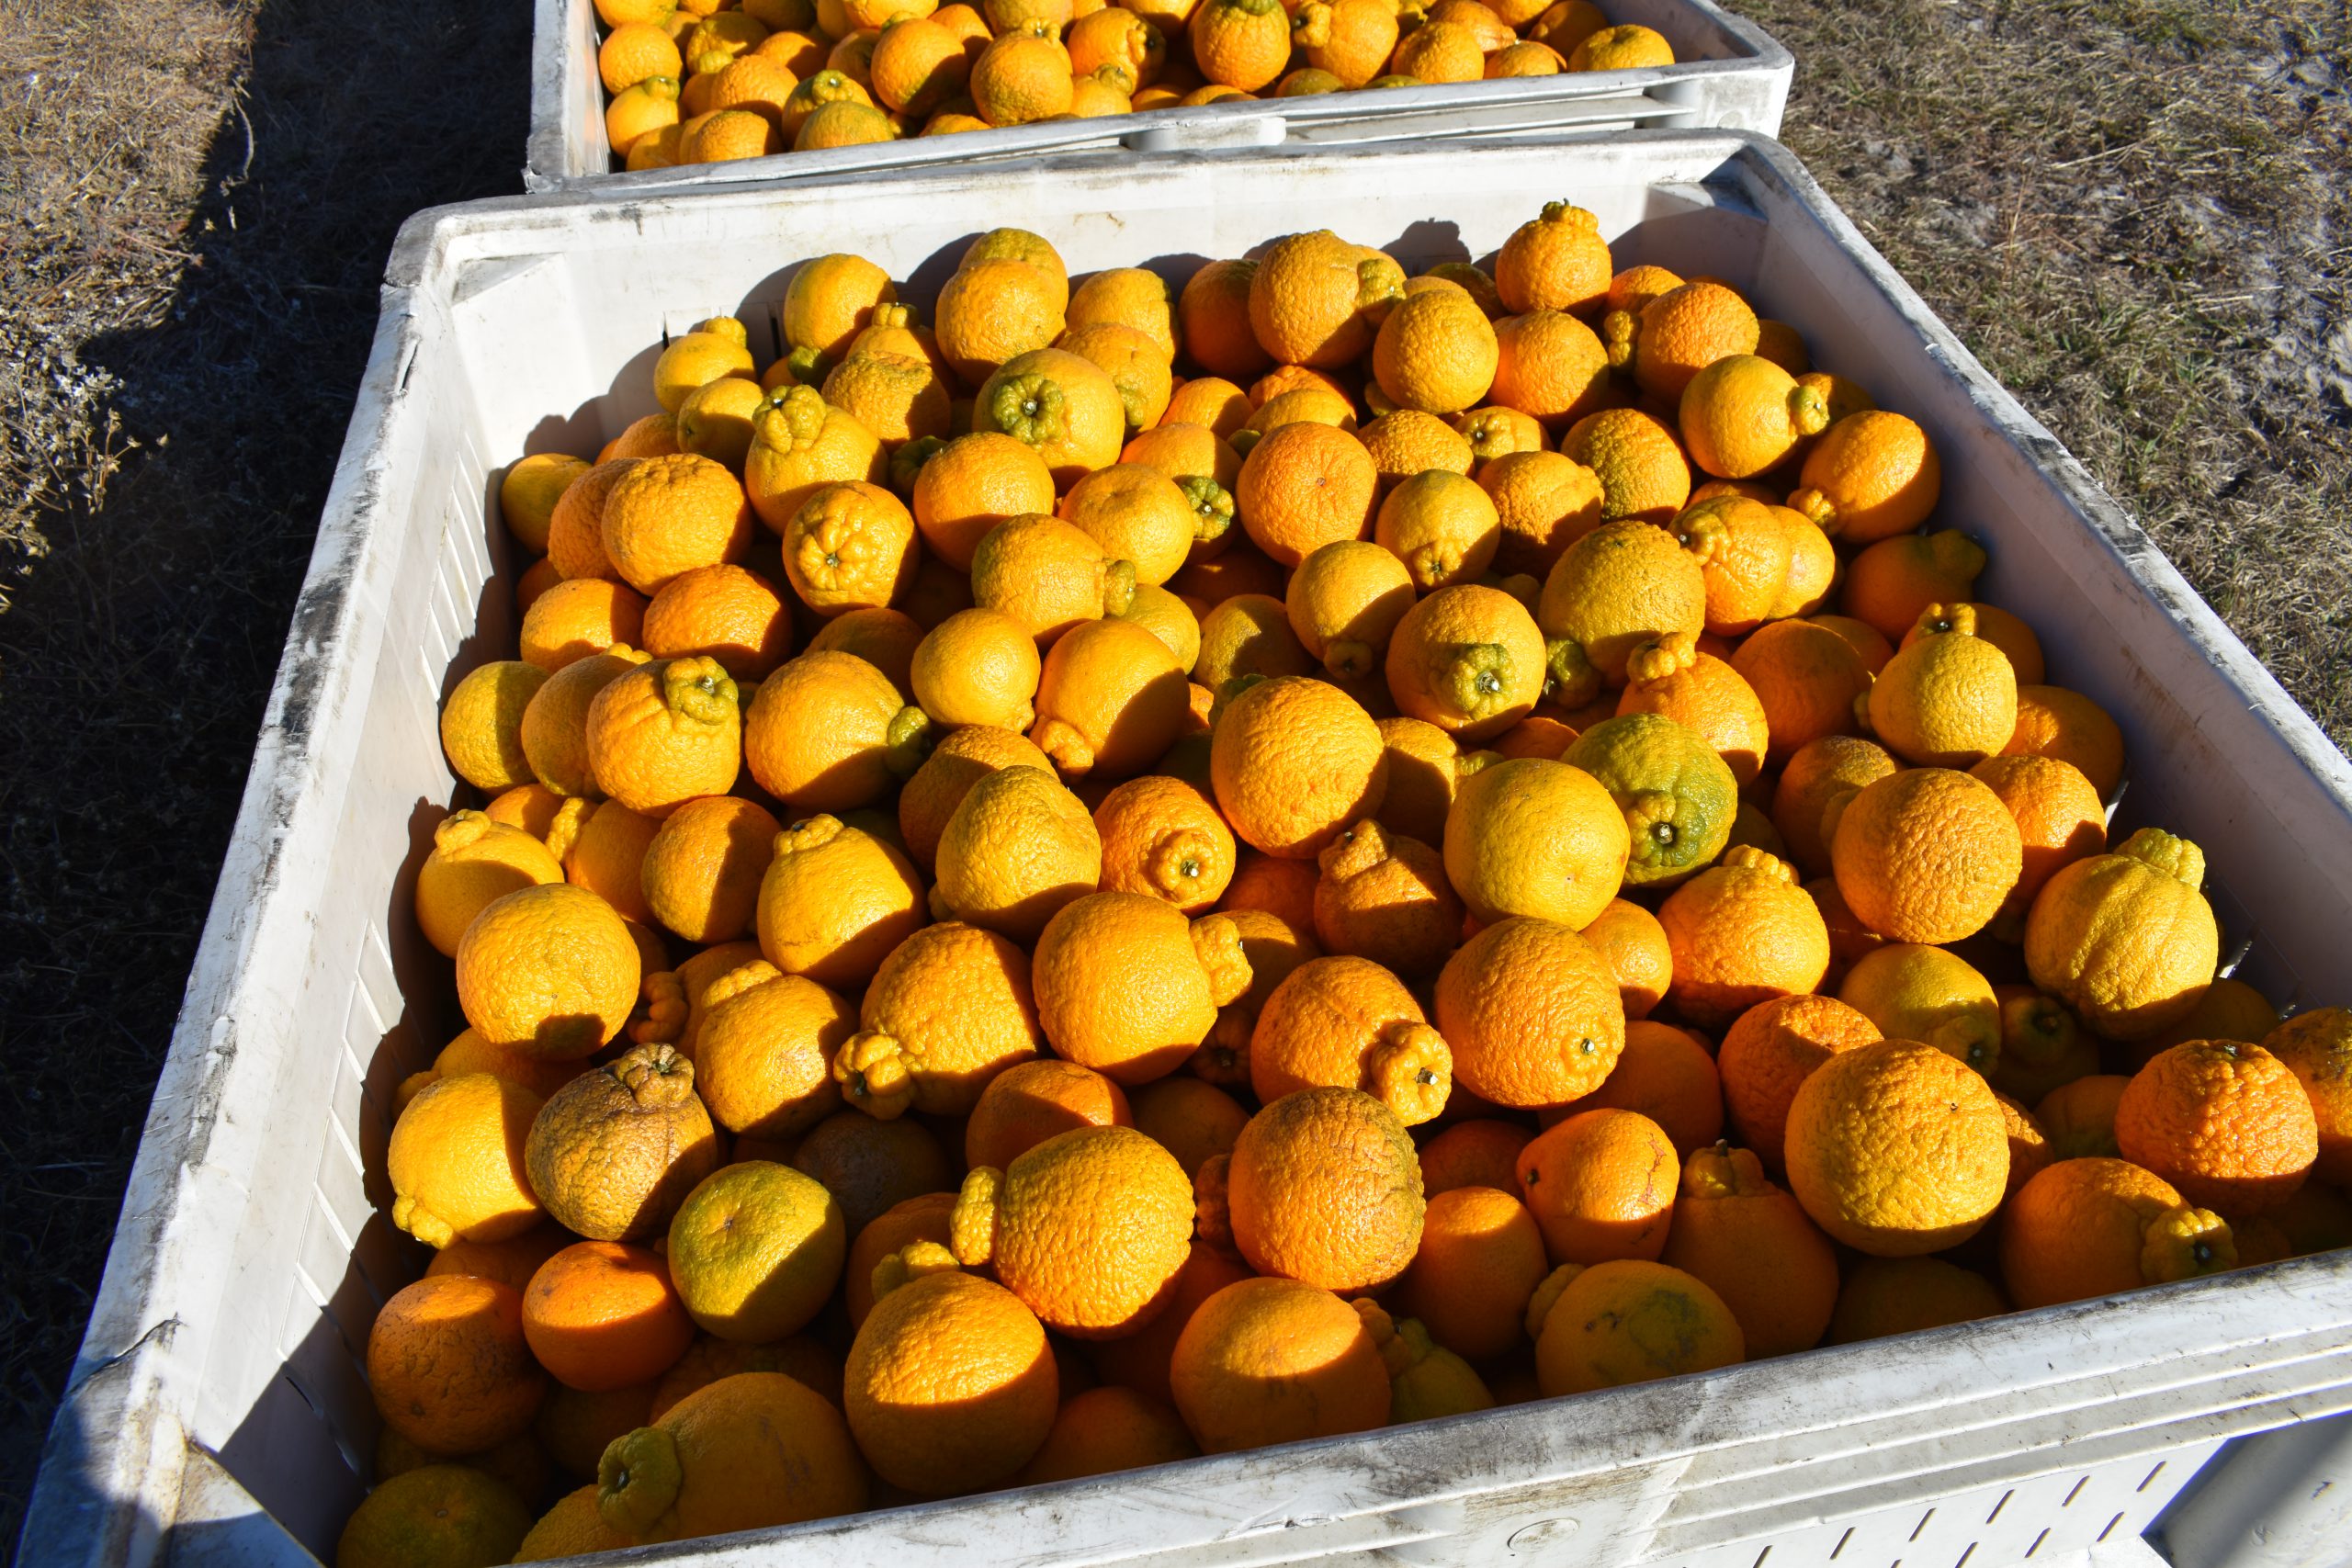 Sumo Citrus season bursts into the New Year with even more